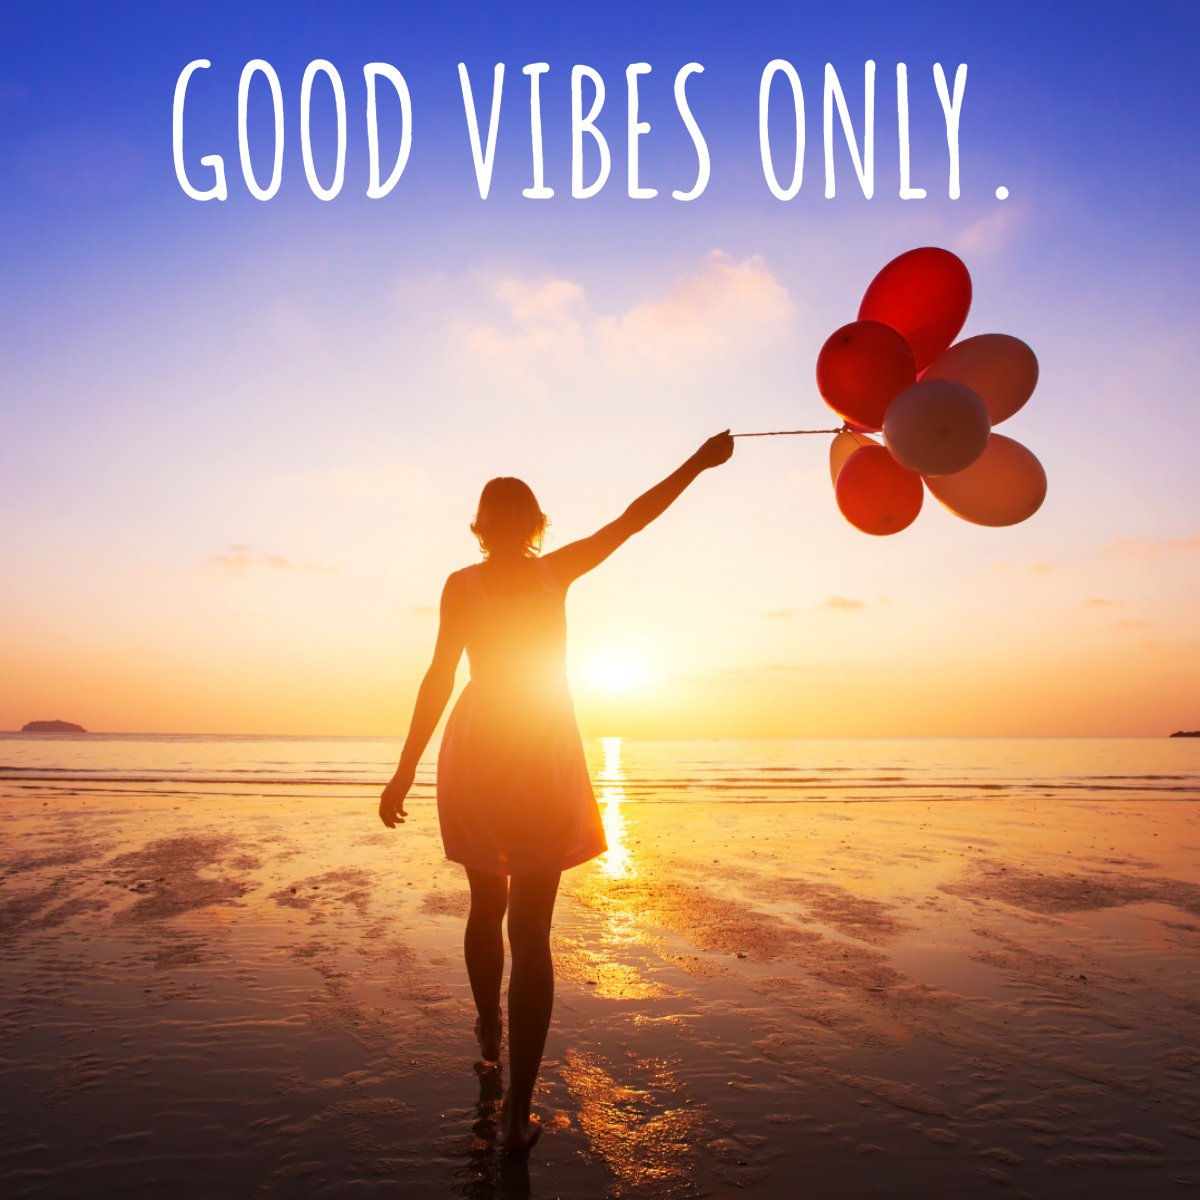 Good Vibes Only...🙆✌️

#goodvibesonly✌️ #vibes #goodvibes #positivevibes #goodquote #goodenergyonly #instagood
#buyTucson#TucsonRealEstate